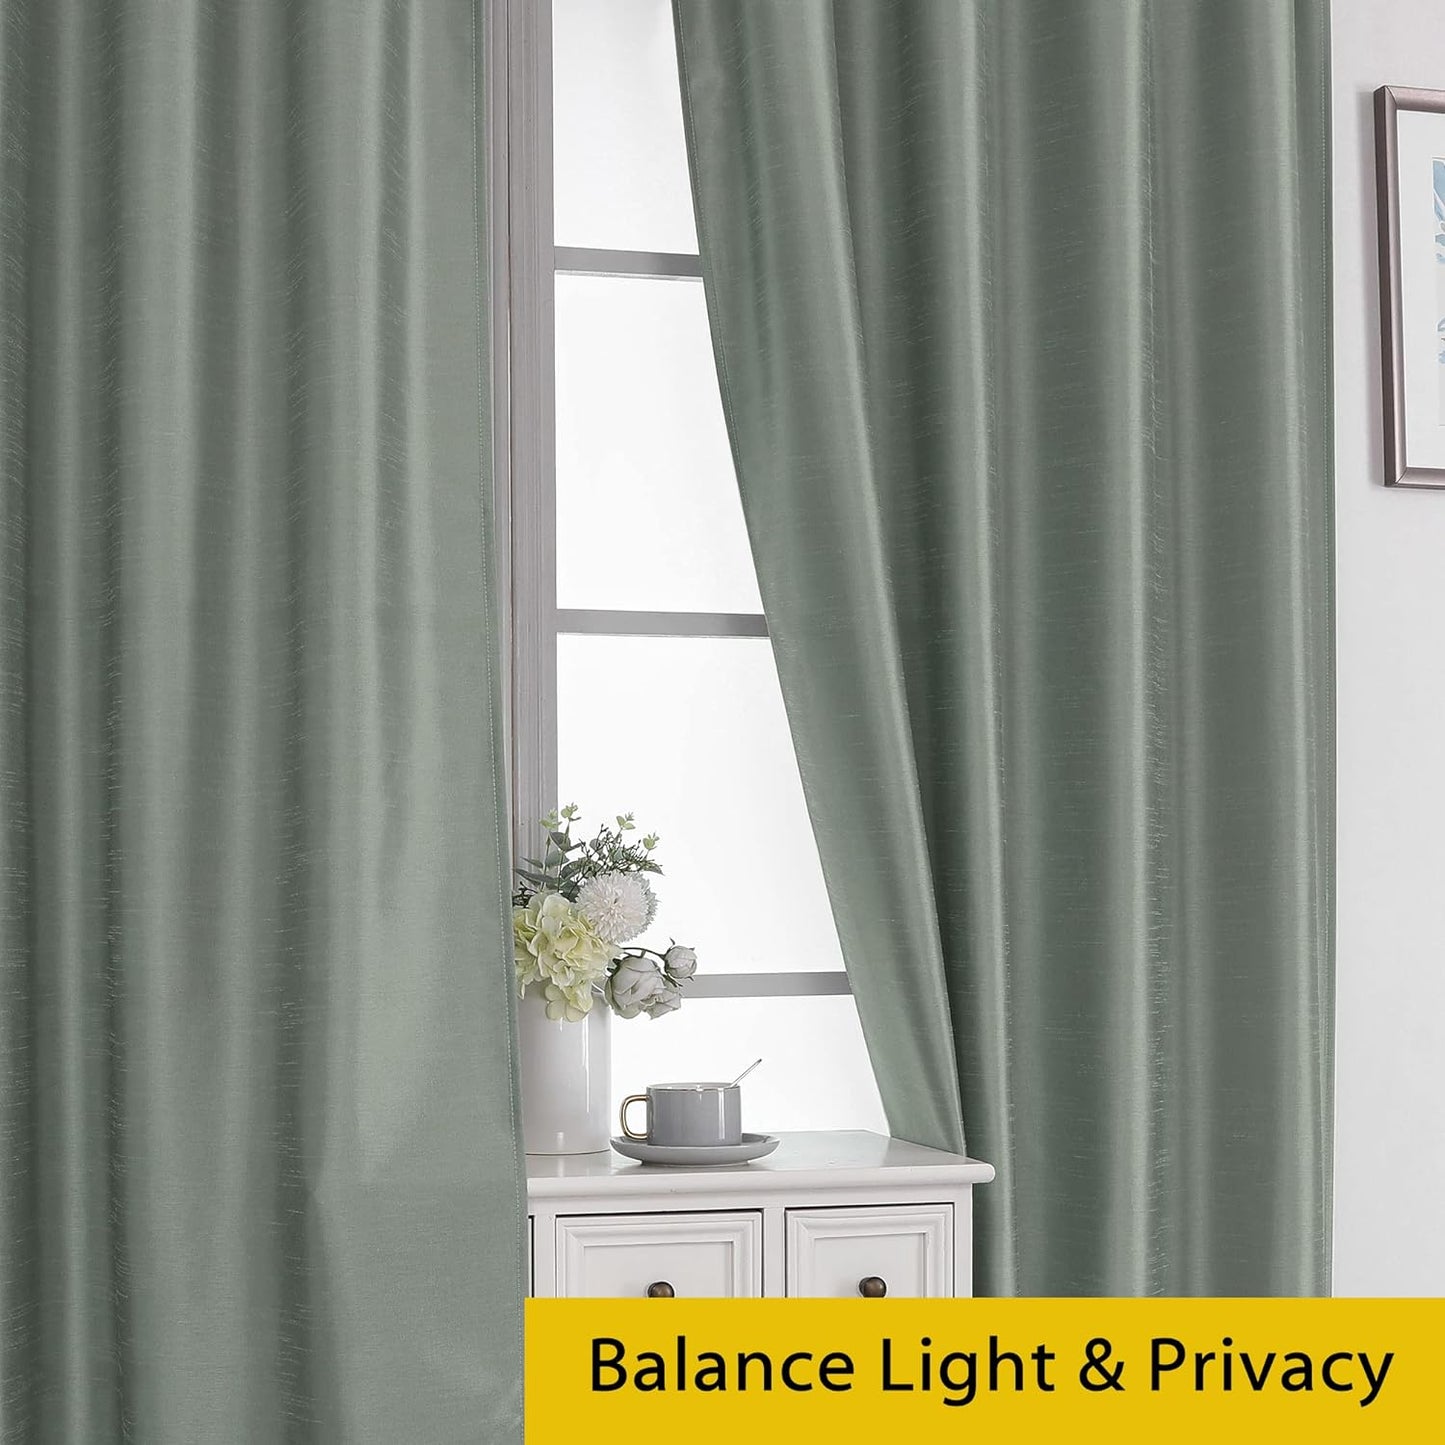 Chyhomenyc Uptown Sage Green Kitchen Curtains 45 Inch Length 2 Panels, Room Darkening Faux Silk Chic Fabric Short Window Curtains for Bedroom Living Room, Each 30Wx45L  Chyhomenyc   